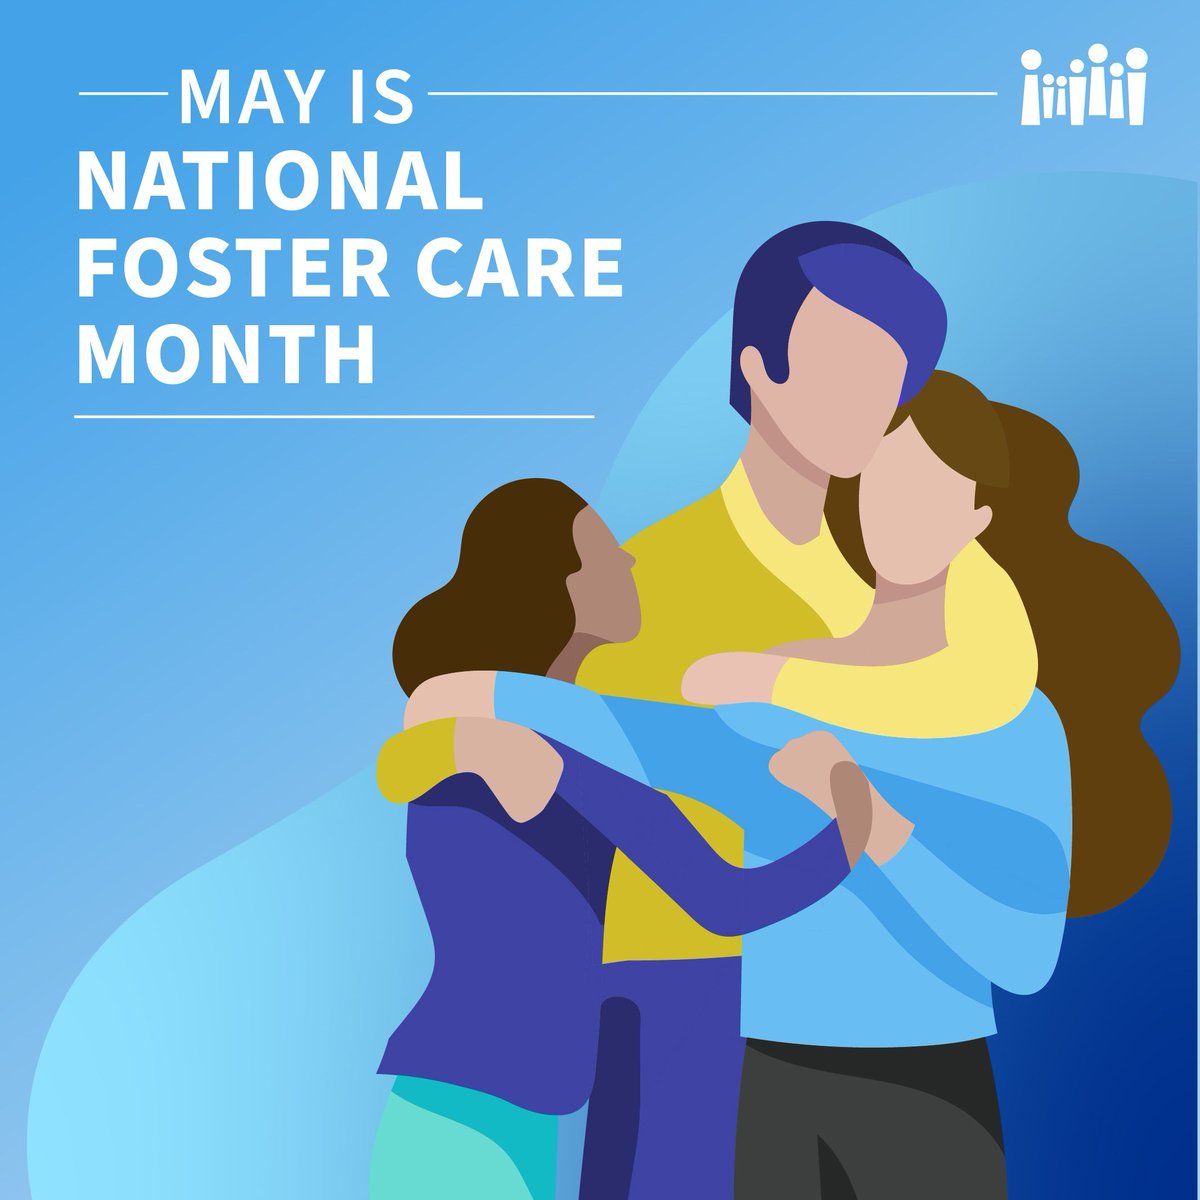 May is National Foster Care Month. Please join us in observing the month by learning about foster care, listening to those with lived experience, supporting organizations doing the work, and advocating for policies that uplift the people most affected. #FosterCareMonth #NFCM2024